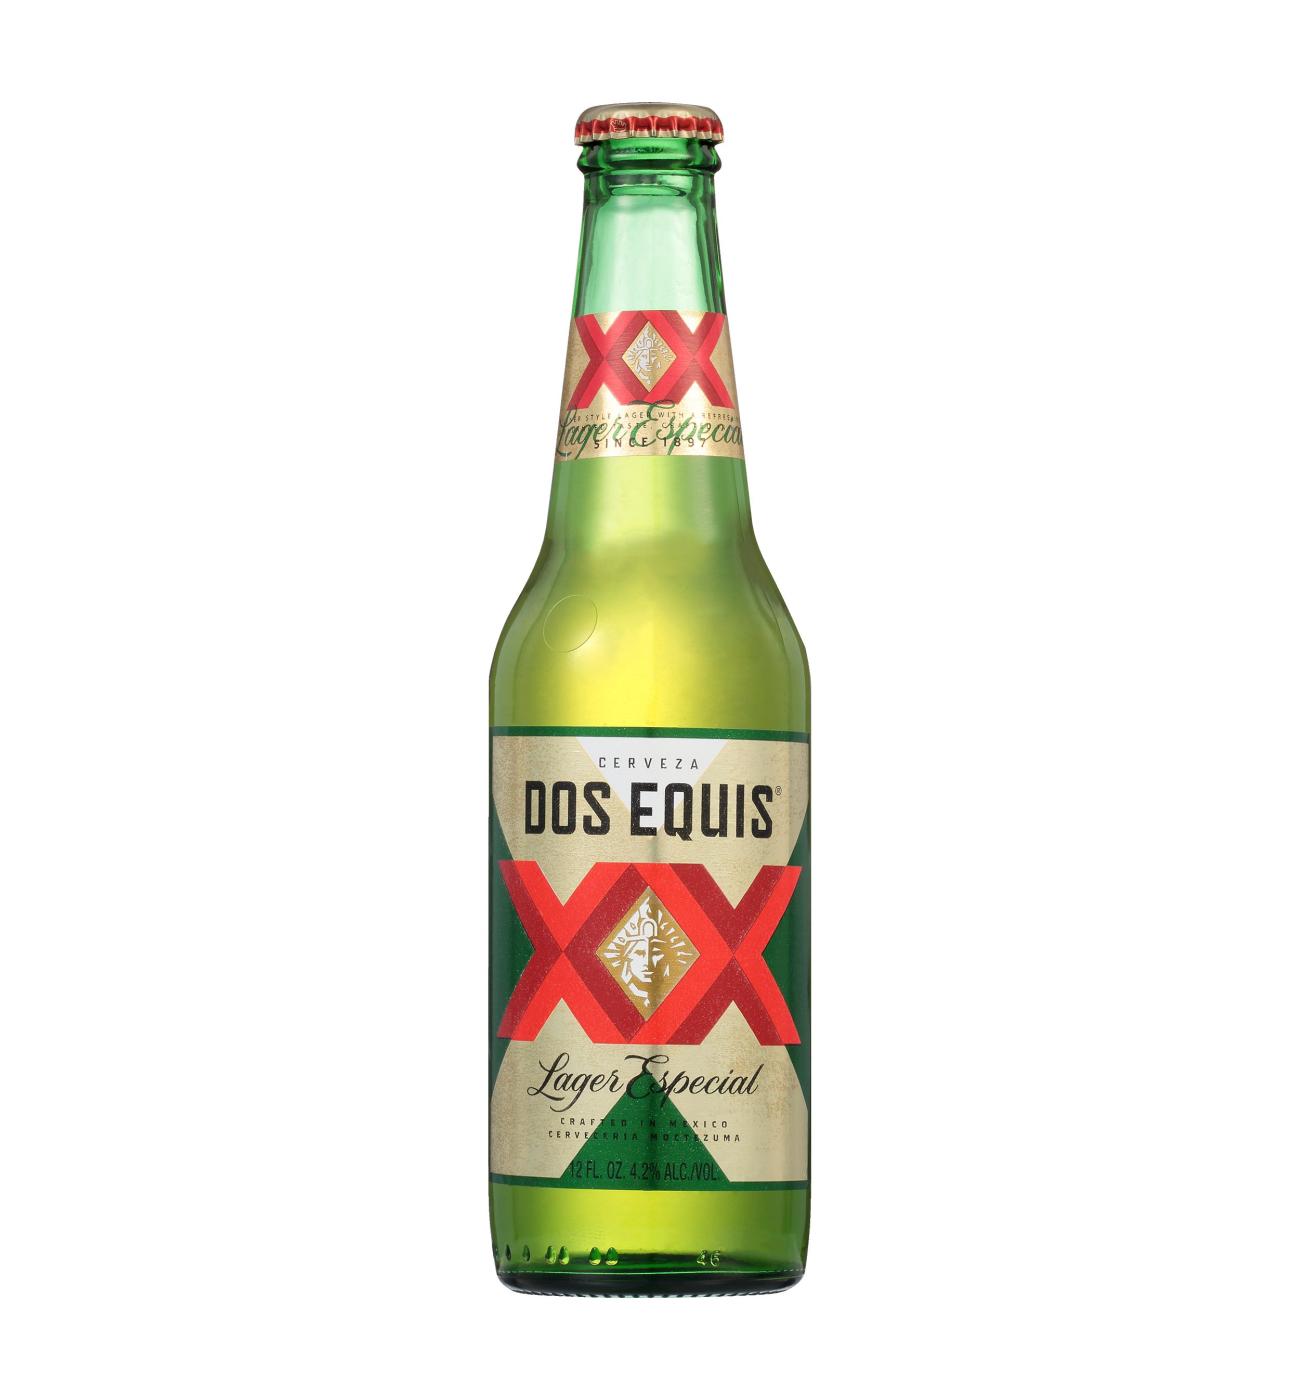 Dos Equis Lager Especial Beer 12 oz Bottles; image 3 of 3